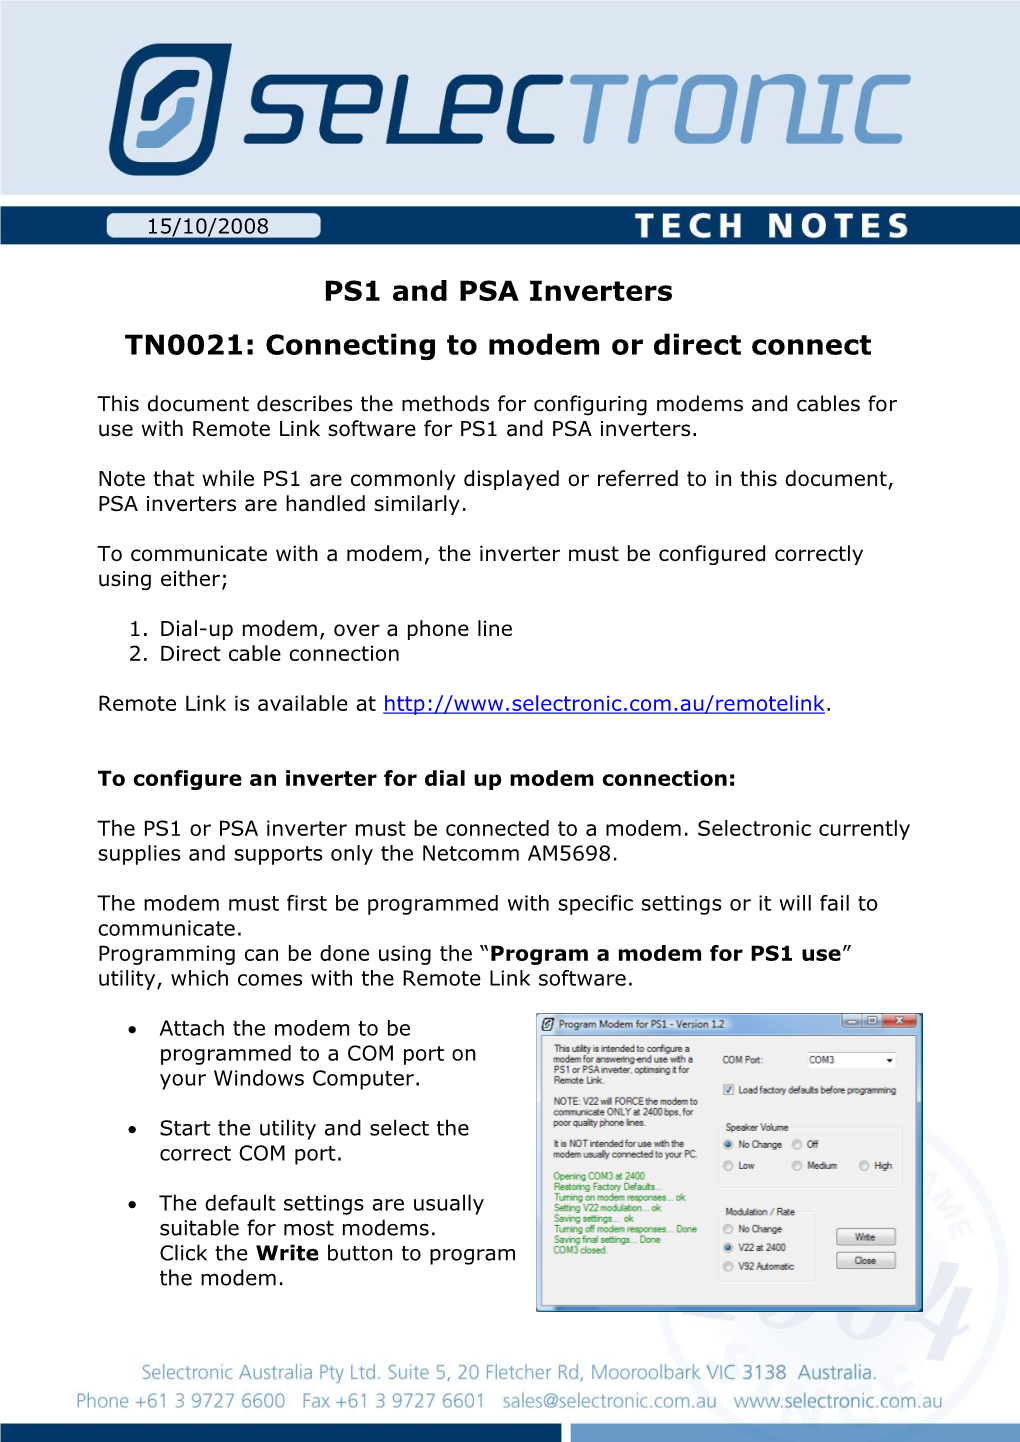 PS1 and PSA Inverters TN0021: Connecting to Modem Or Direct Connect